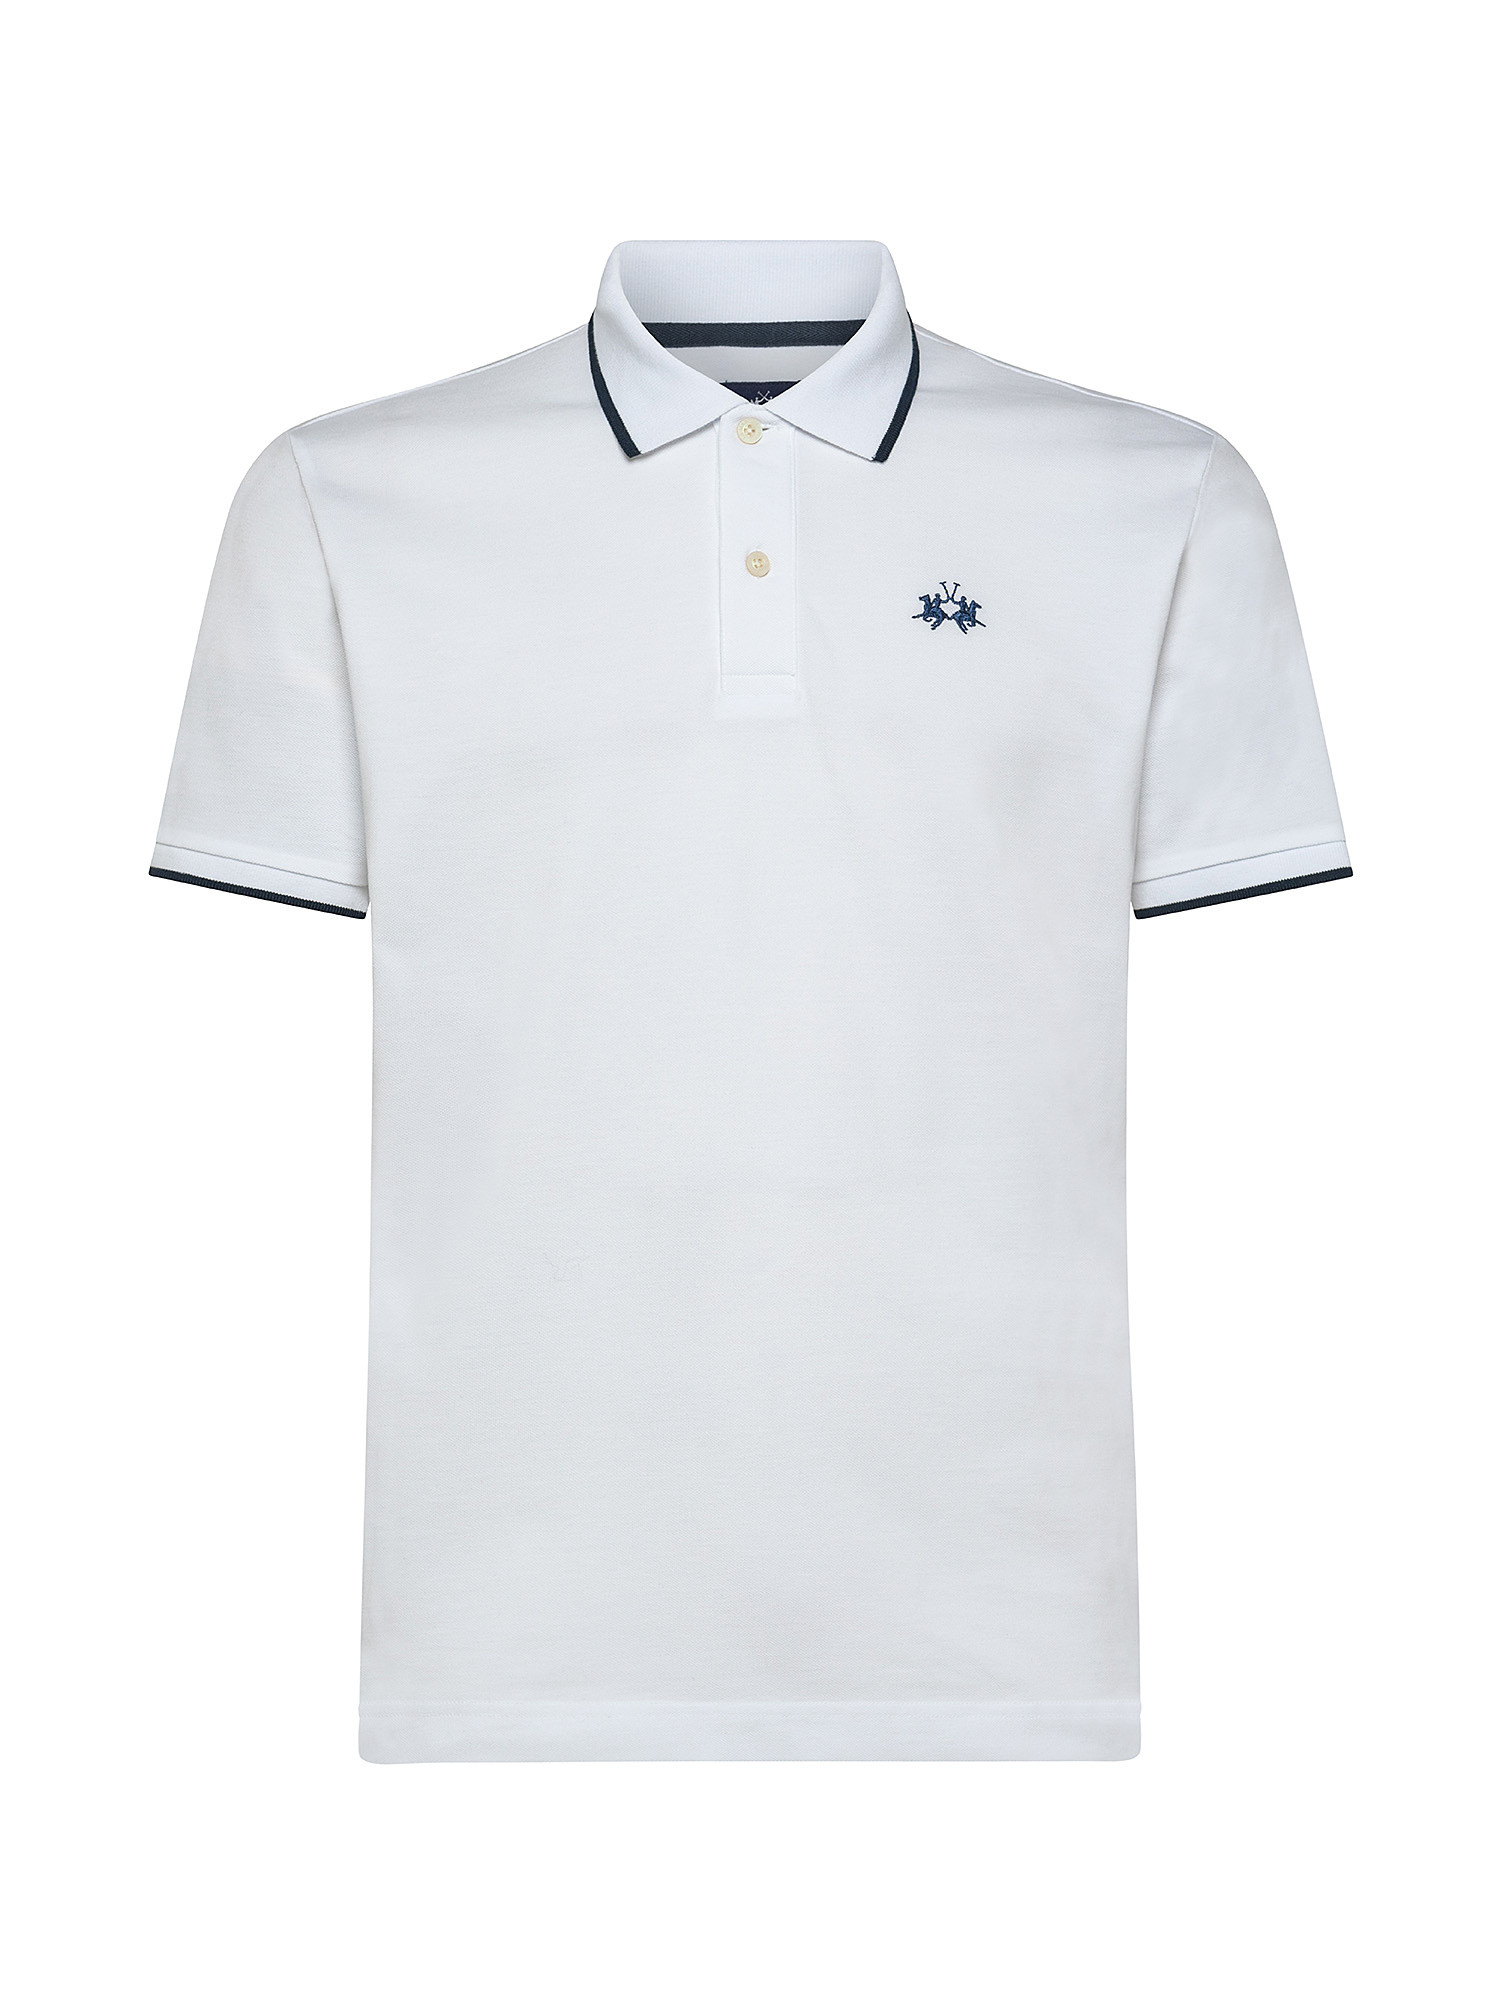 Regular-fit classic piqué polo shirt, White, large image number 0